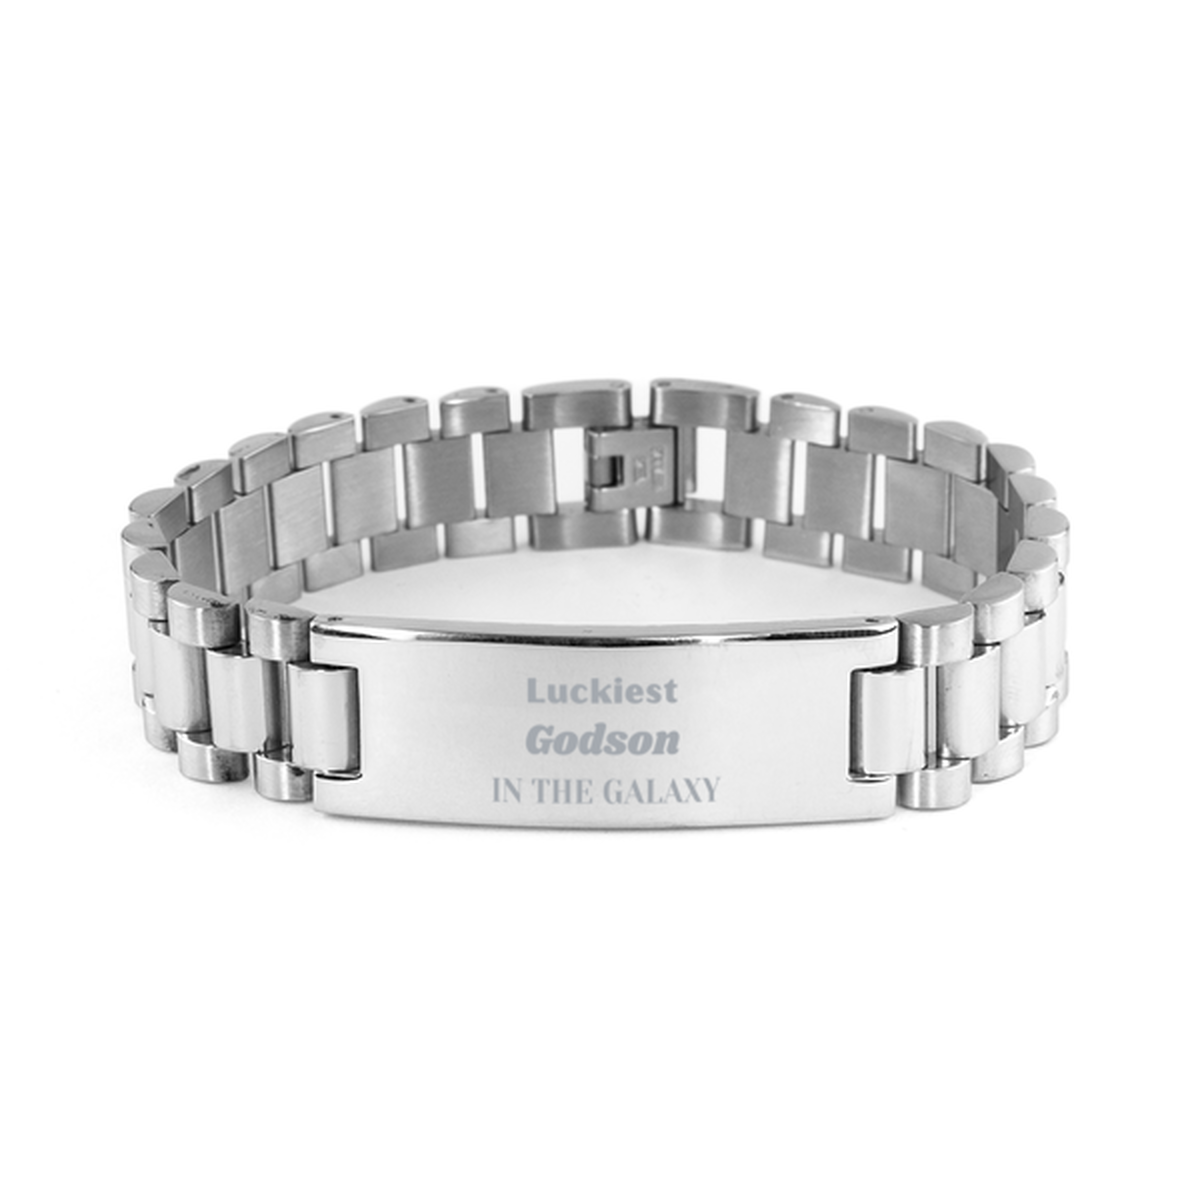 Luckiest Godson in the Galaxy, To My Godson Engraved Gifts, Christmas Godson Ladder Stainless Steel Bracelet Gifts, X-mas Birthday Unique Gifts For Godson Men Women